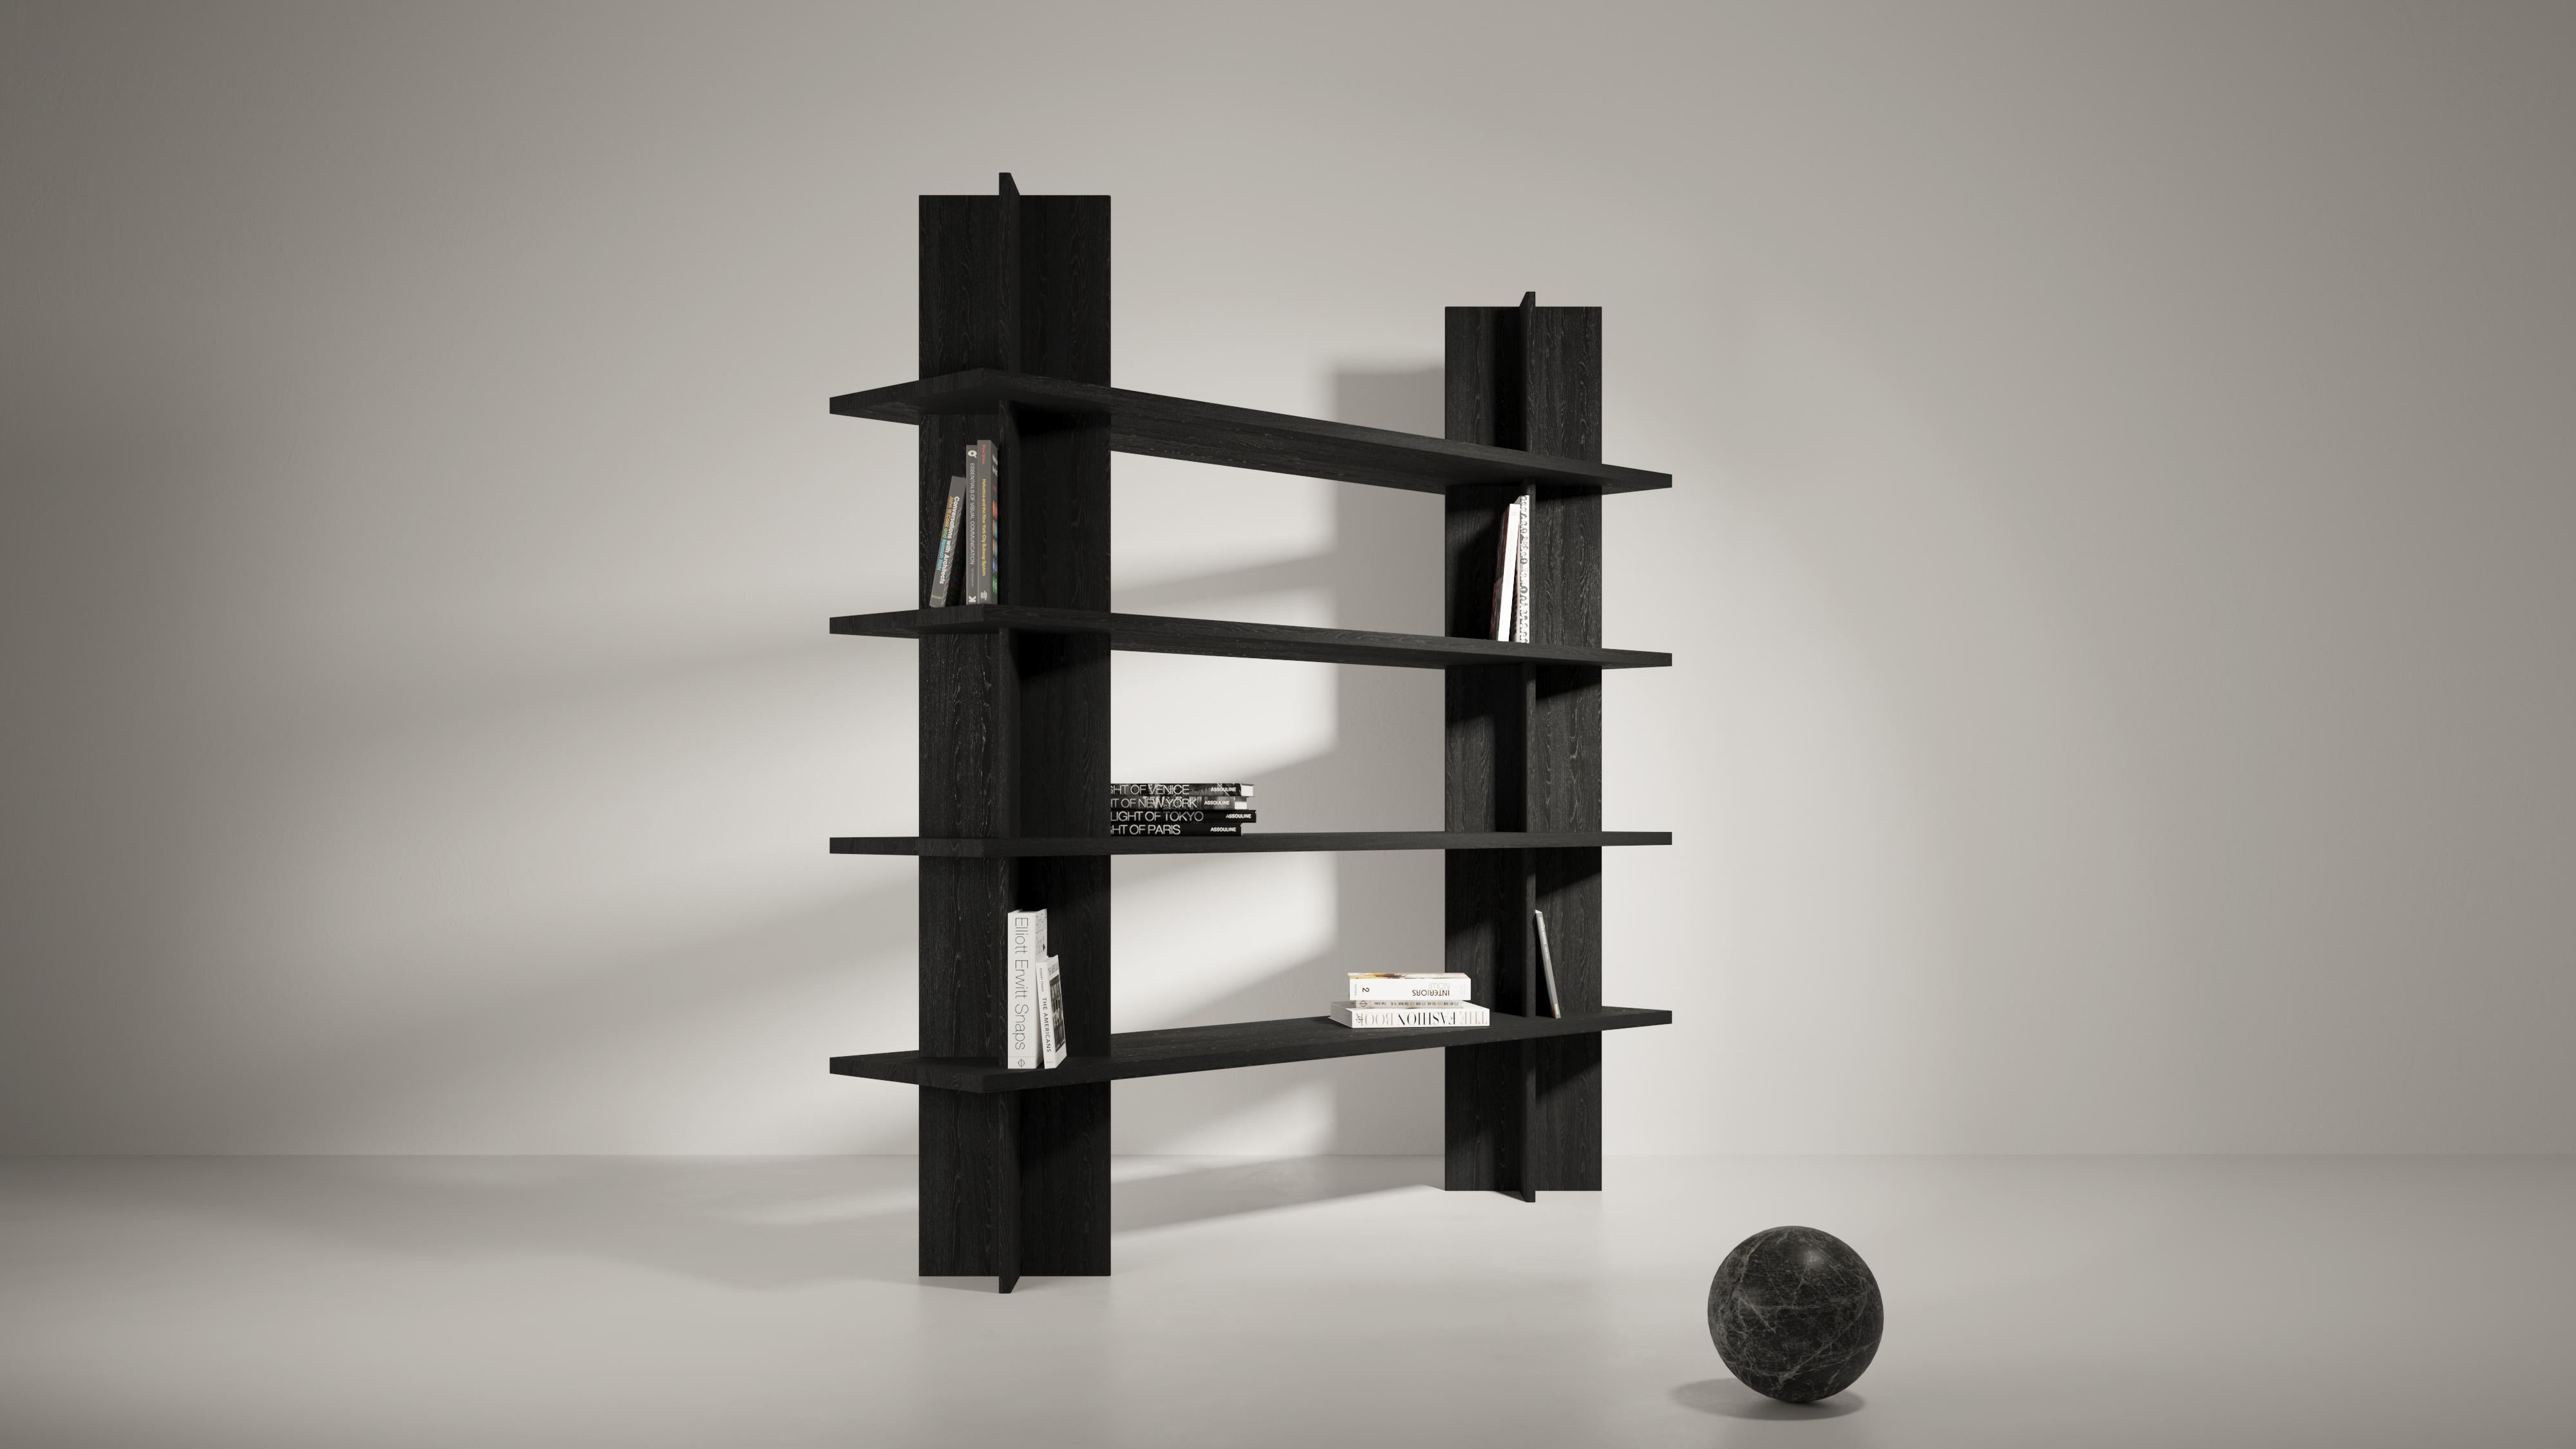 Monument shelves by Cocorico for La Chance
Dimensions: D 45 x L 130 x H 197 cm
Materials: black stained wood column, black staine wood shelves

Material available: birchwood, white marble, green marble, black marble, Pele de tigre marble,